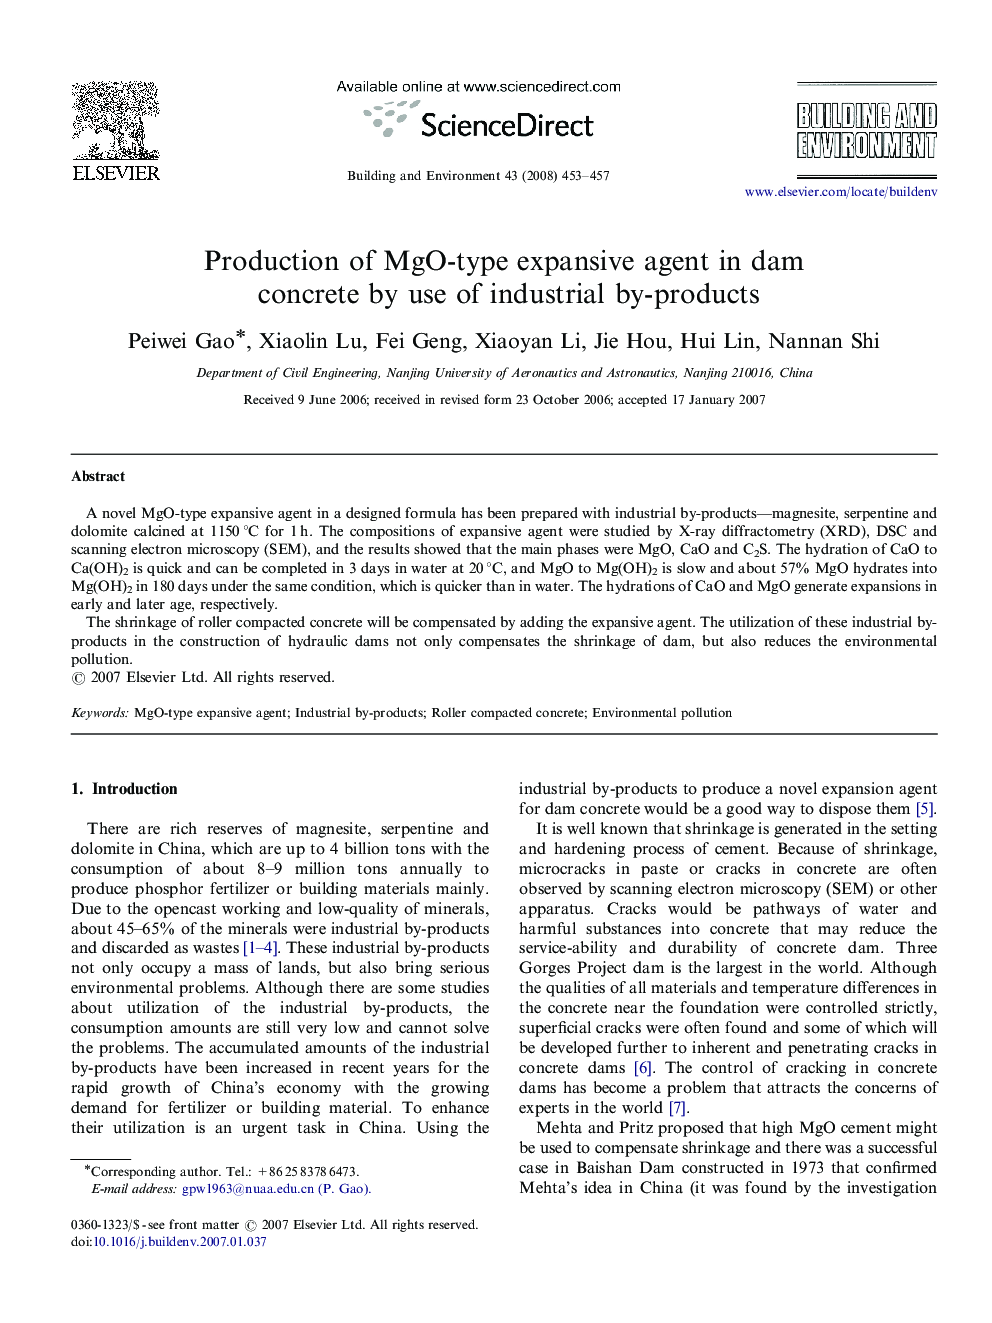 Production of MgO-type expansive agent in dam concrete by use of industrial by-products